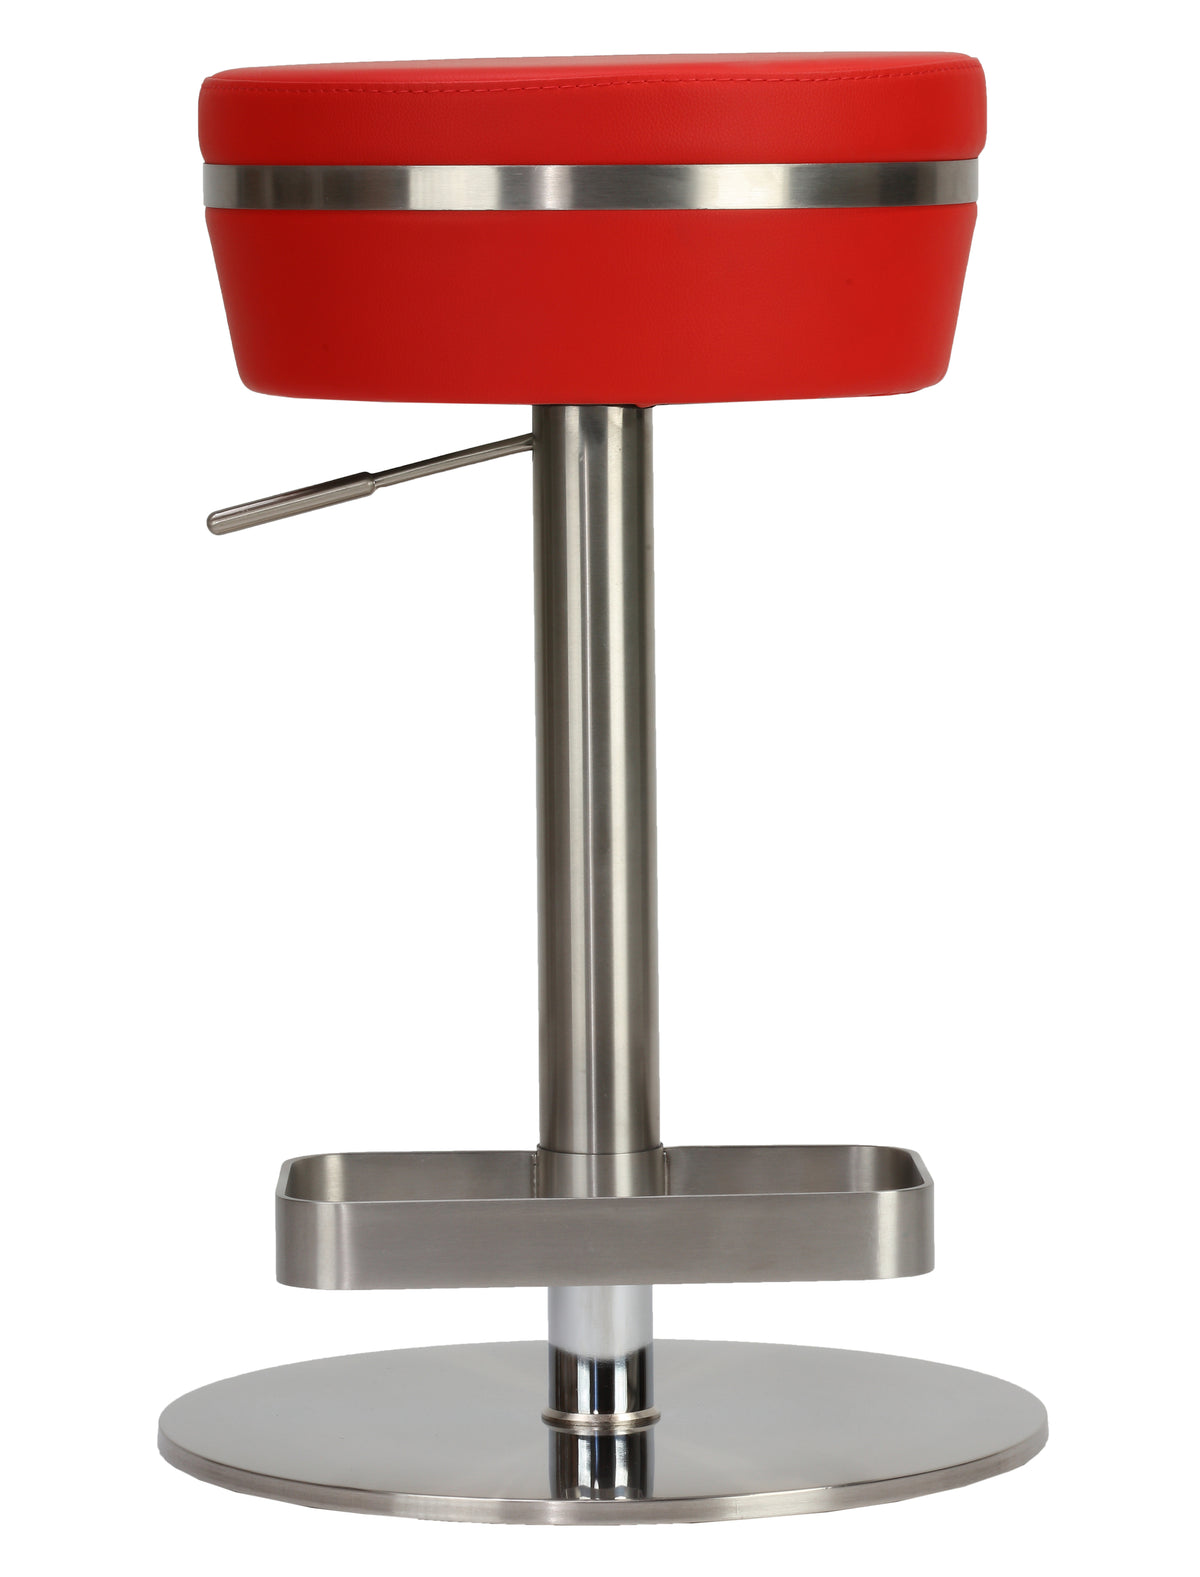 Cortesi Home Athena Premium Adjustable Backless Round Barstool in Brushed Stainless Steel with Heavy Solid Base, Red